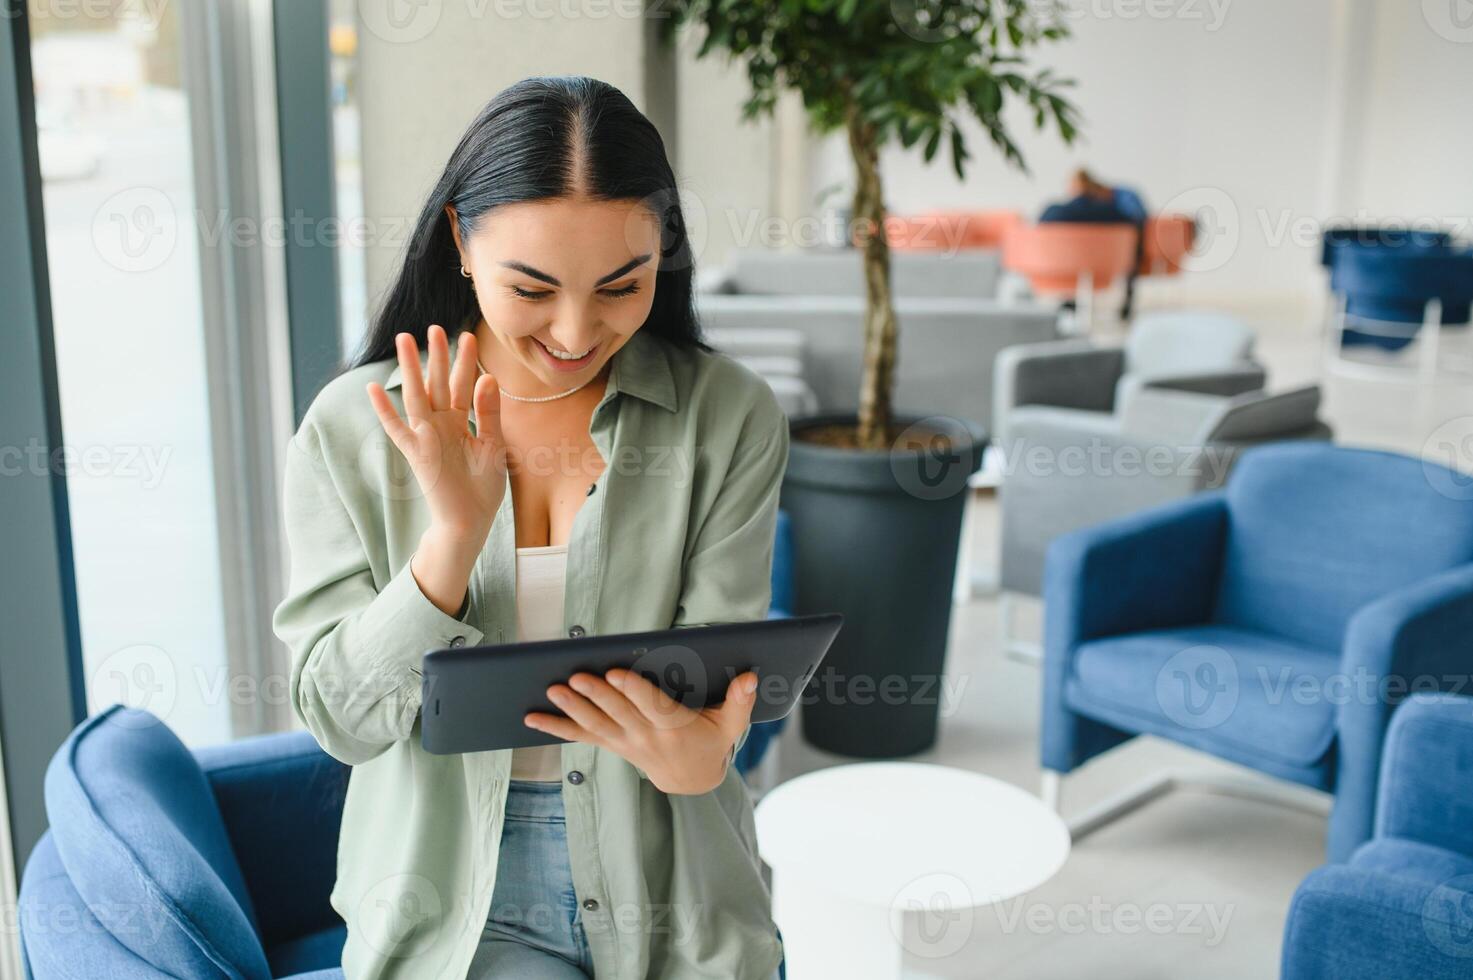 Traveler tourist woman with headphones working on laptop, spreading hands during video call while waiting in lobby hall at airport. Passenger traveling abroad on weekends getaway. Air flight concept photo